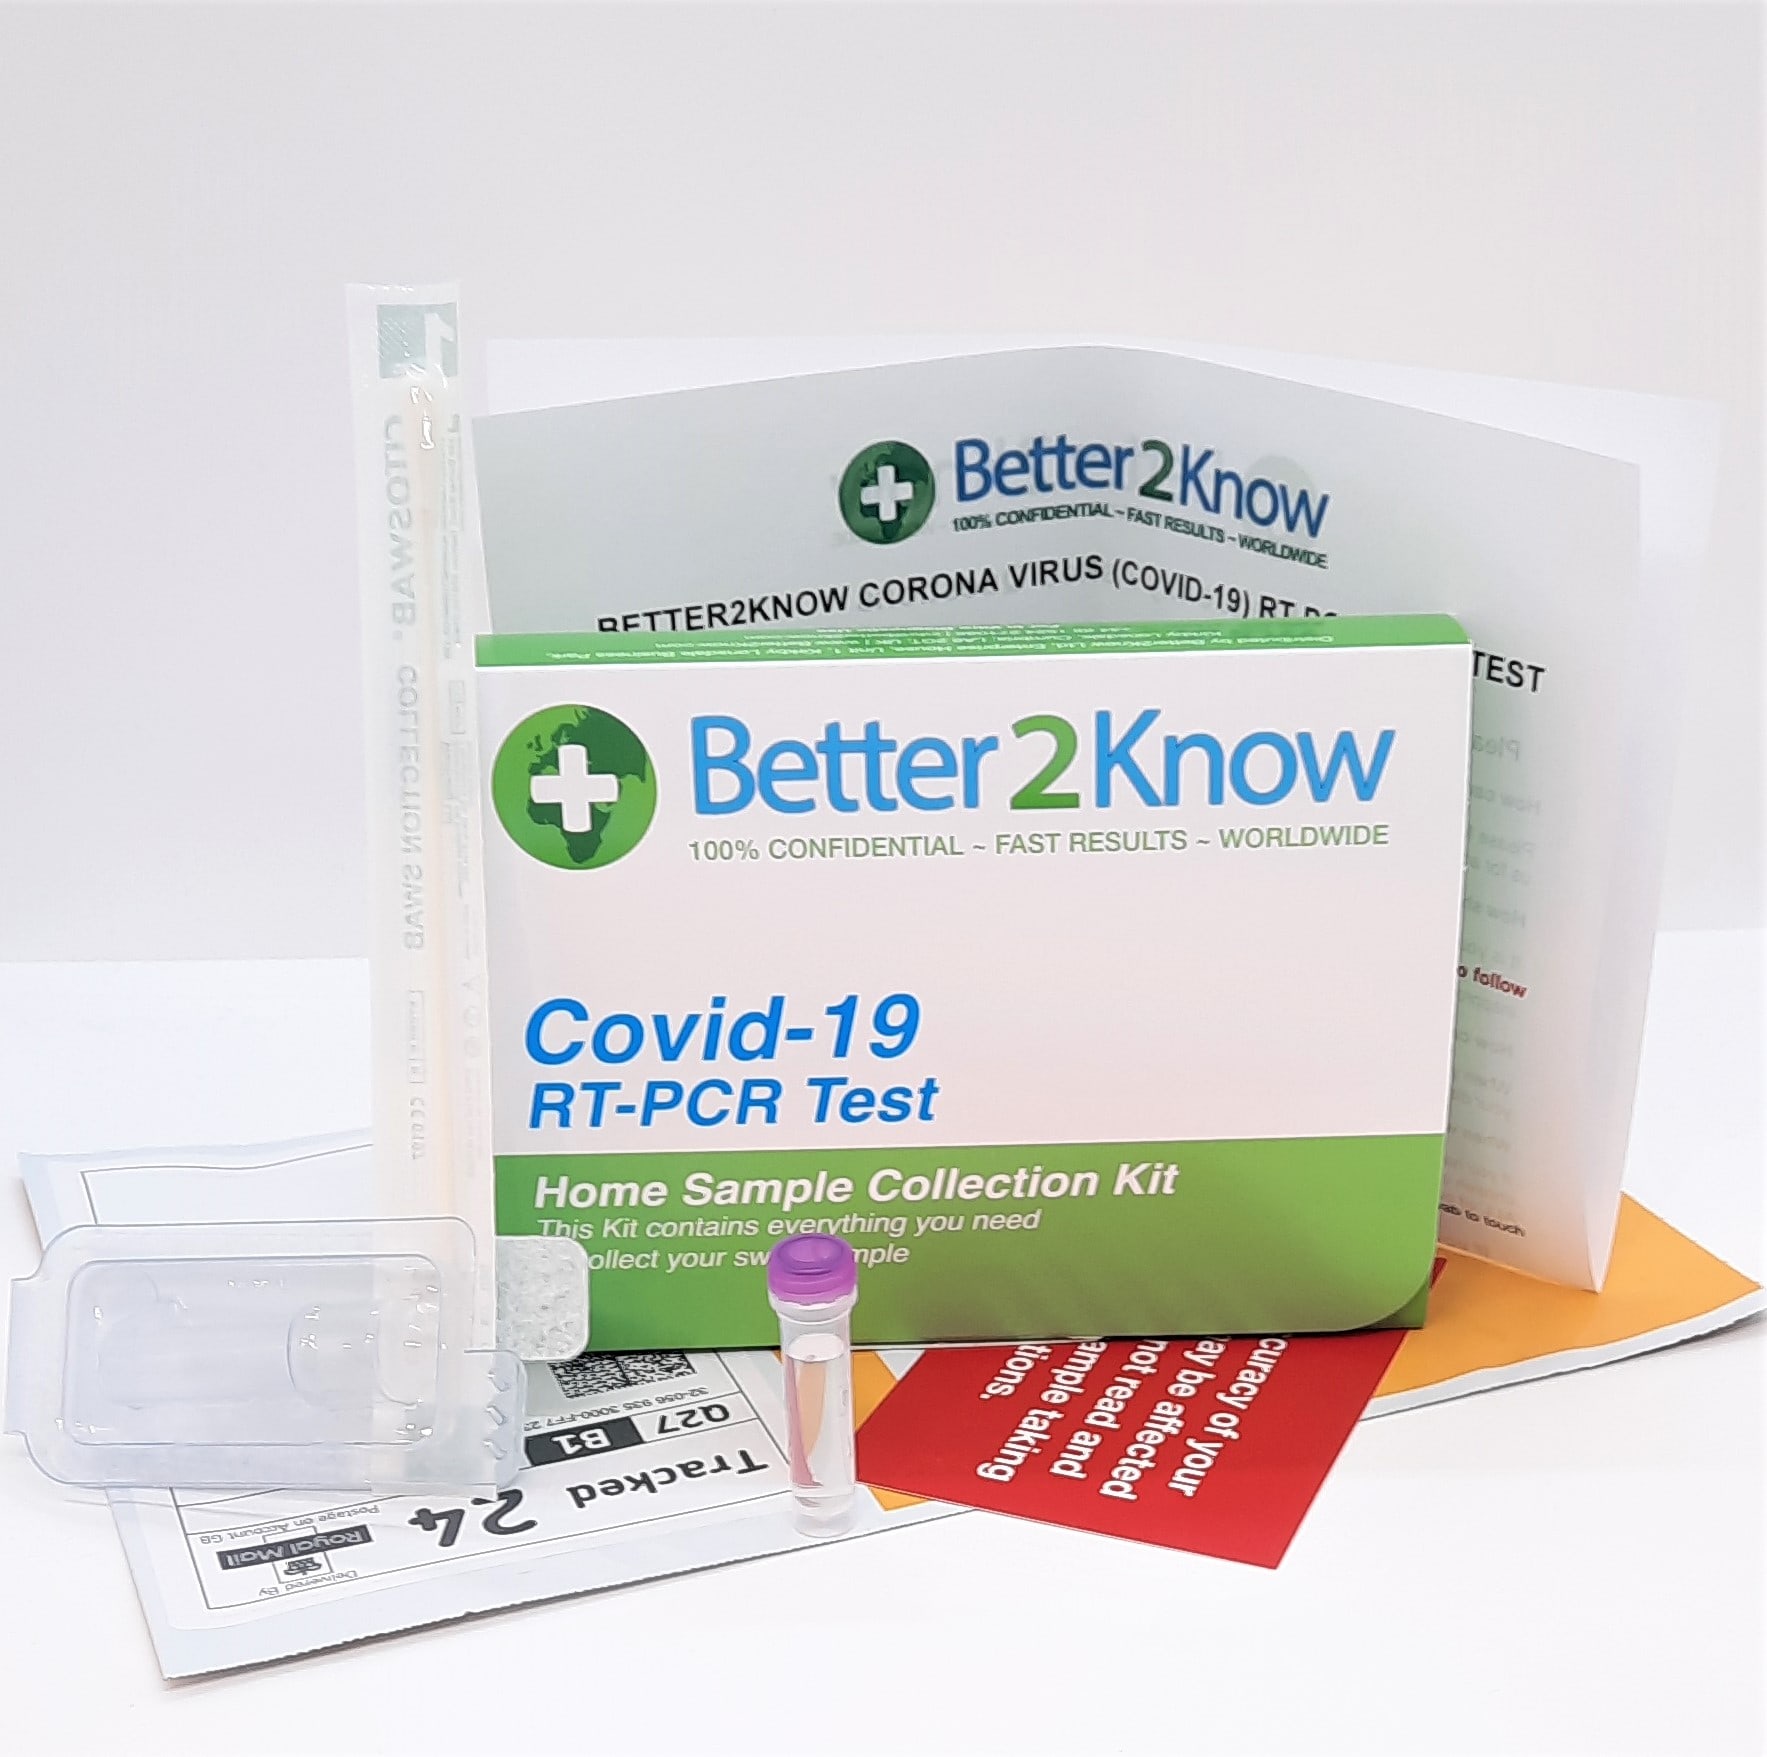 Better2Know Covid-19 PCR test.